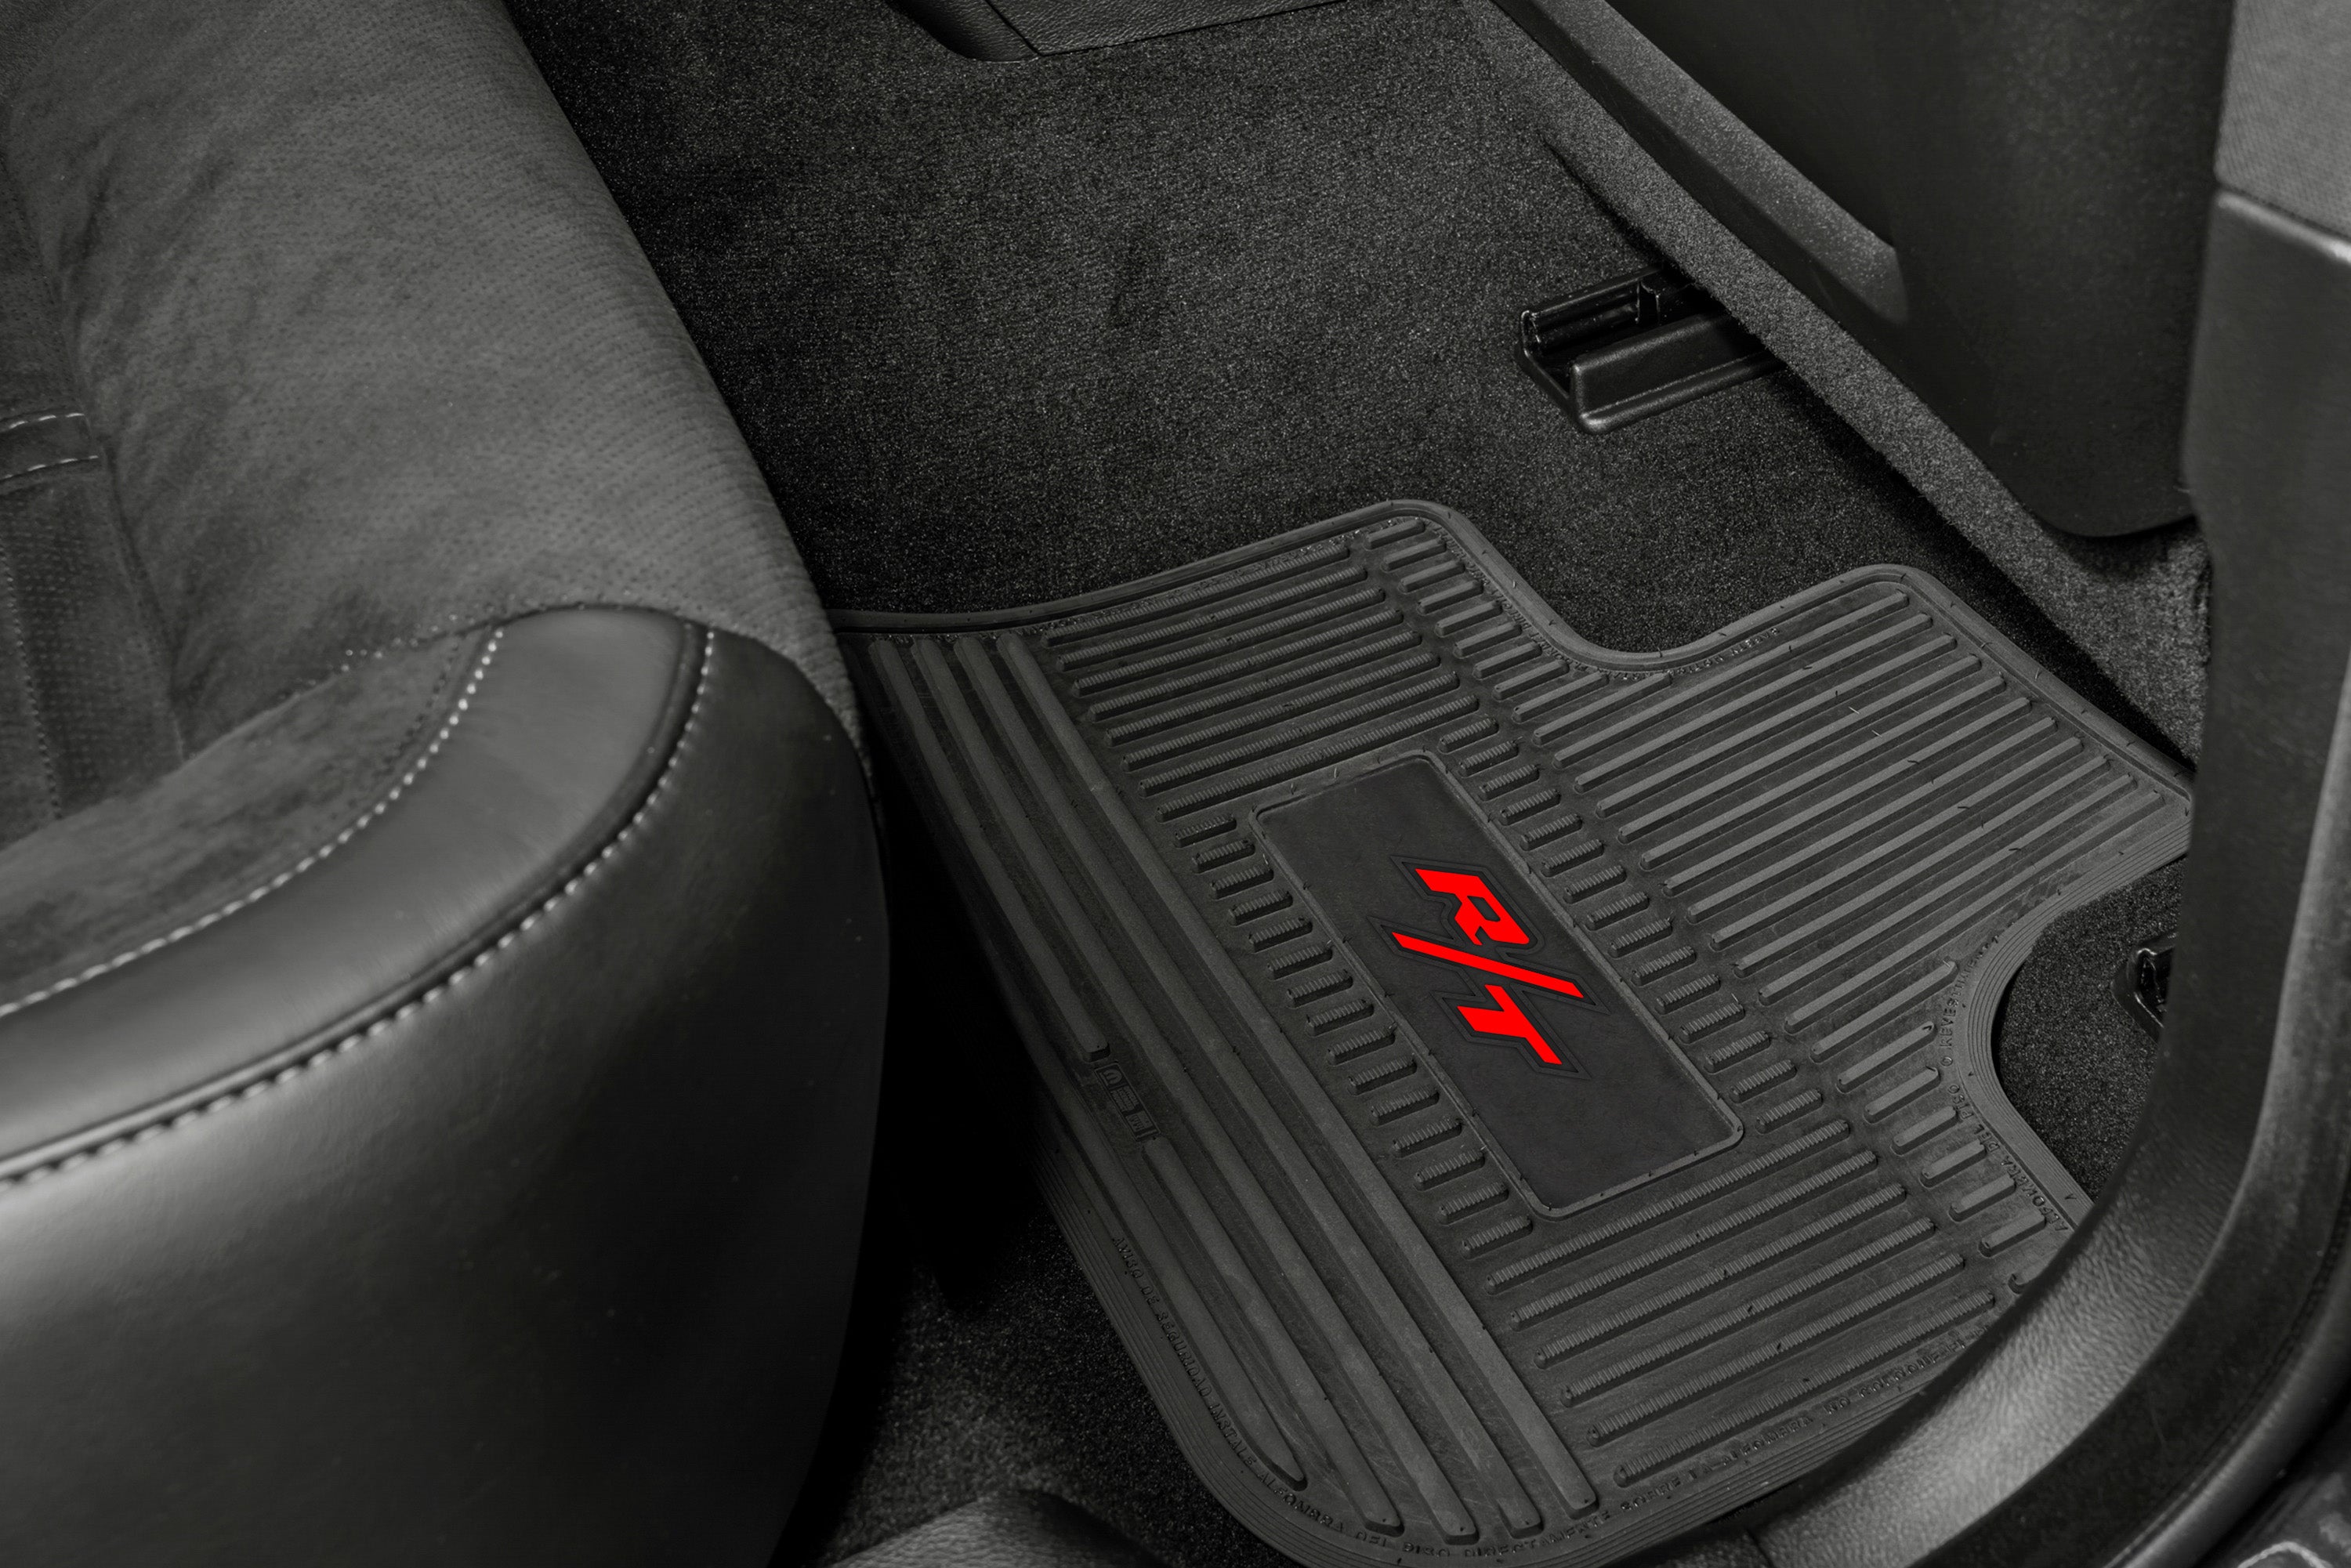 Charger Floor Mats 11-23 Dodge Charger AWD 4 Piece Custom Vintage Scene w/ R/T (2008-2014) Insert - Black w/ Red Insert FlexTread